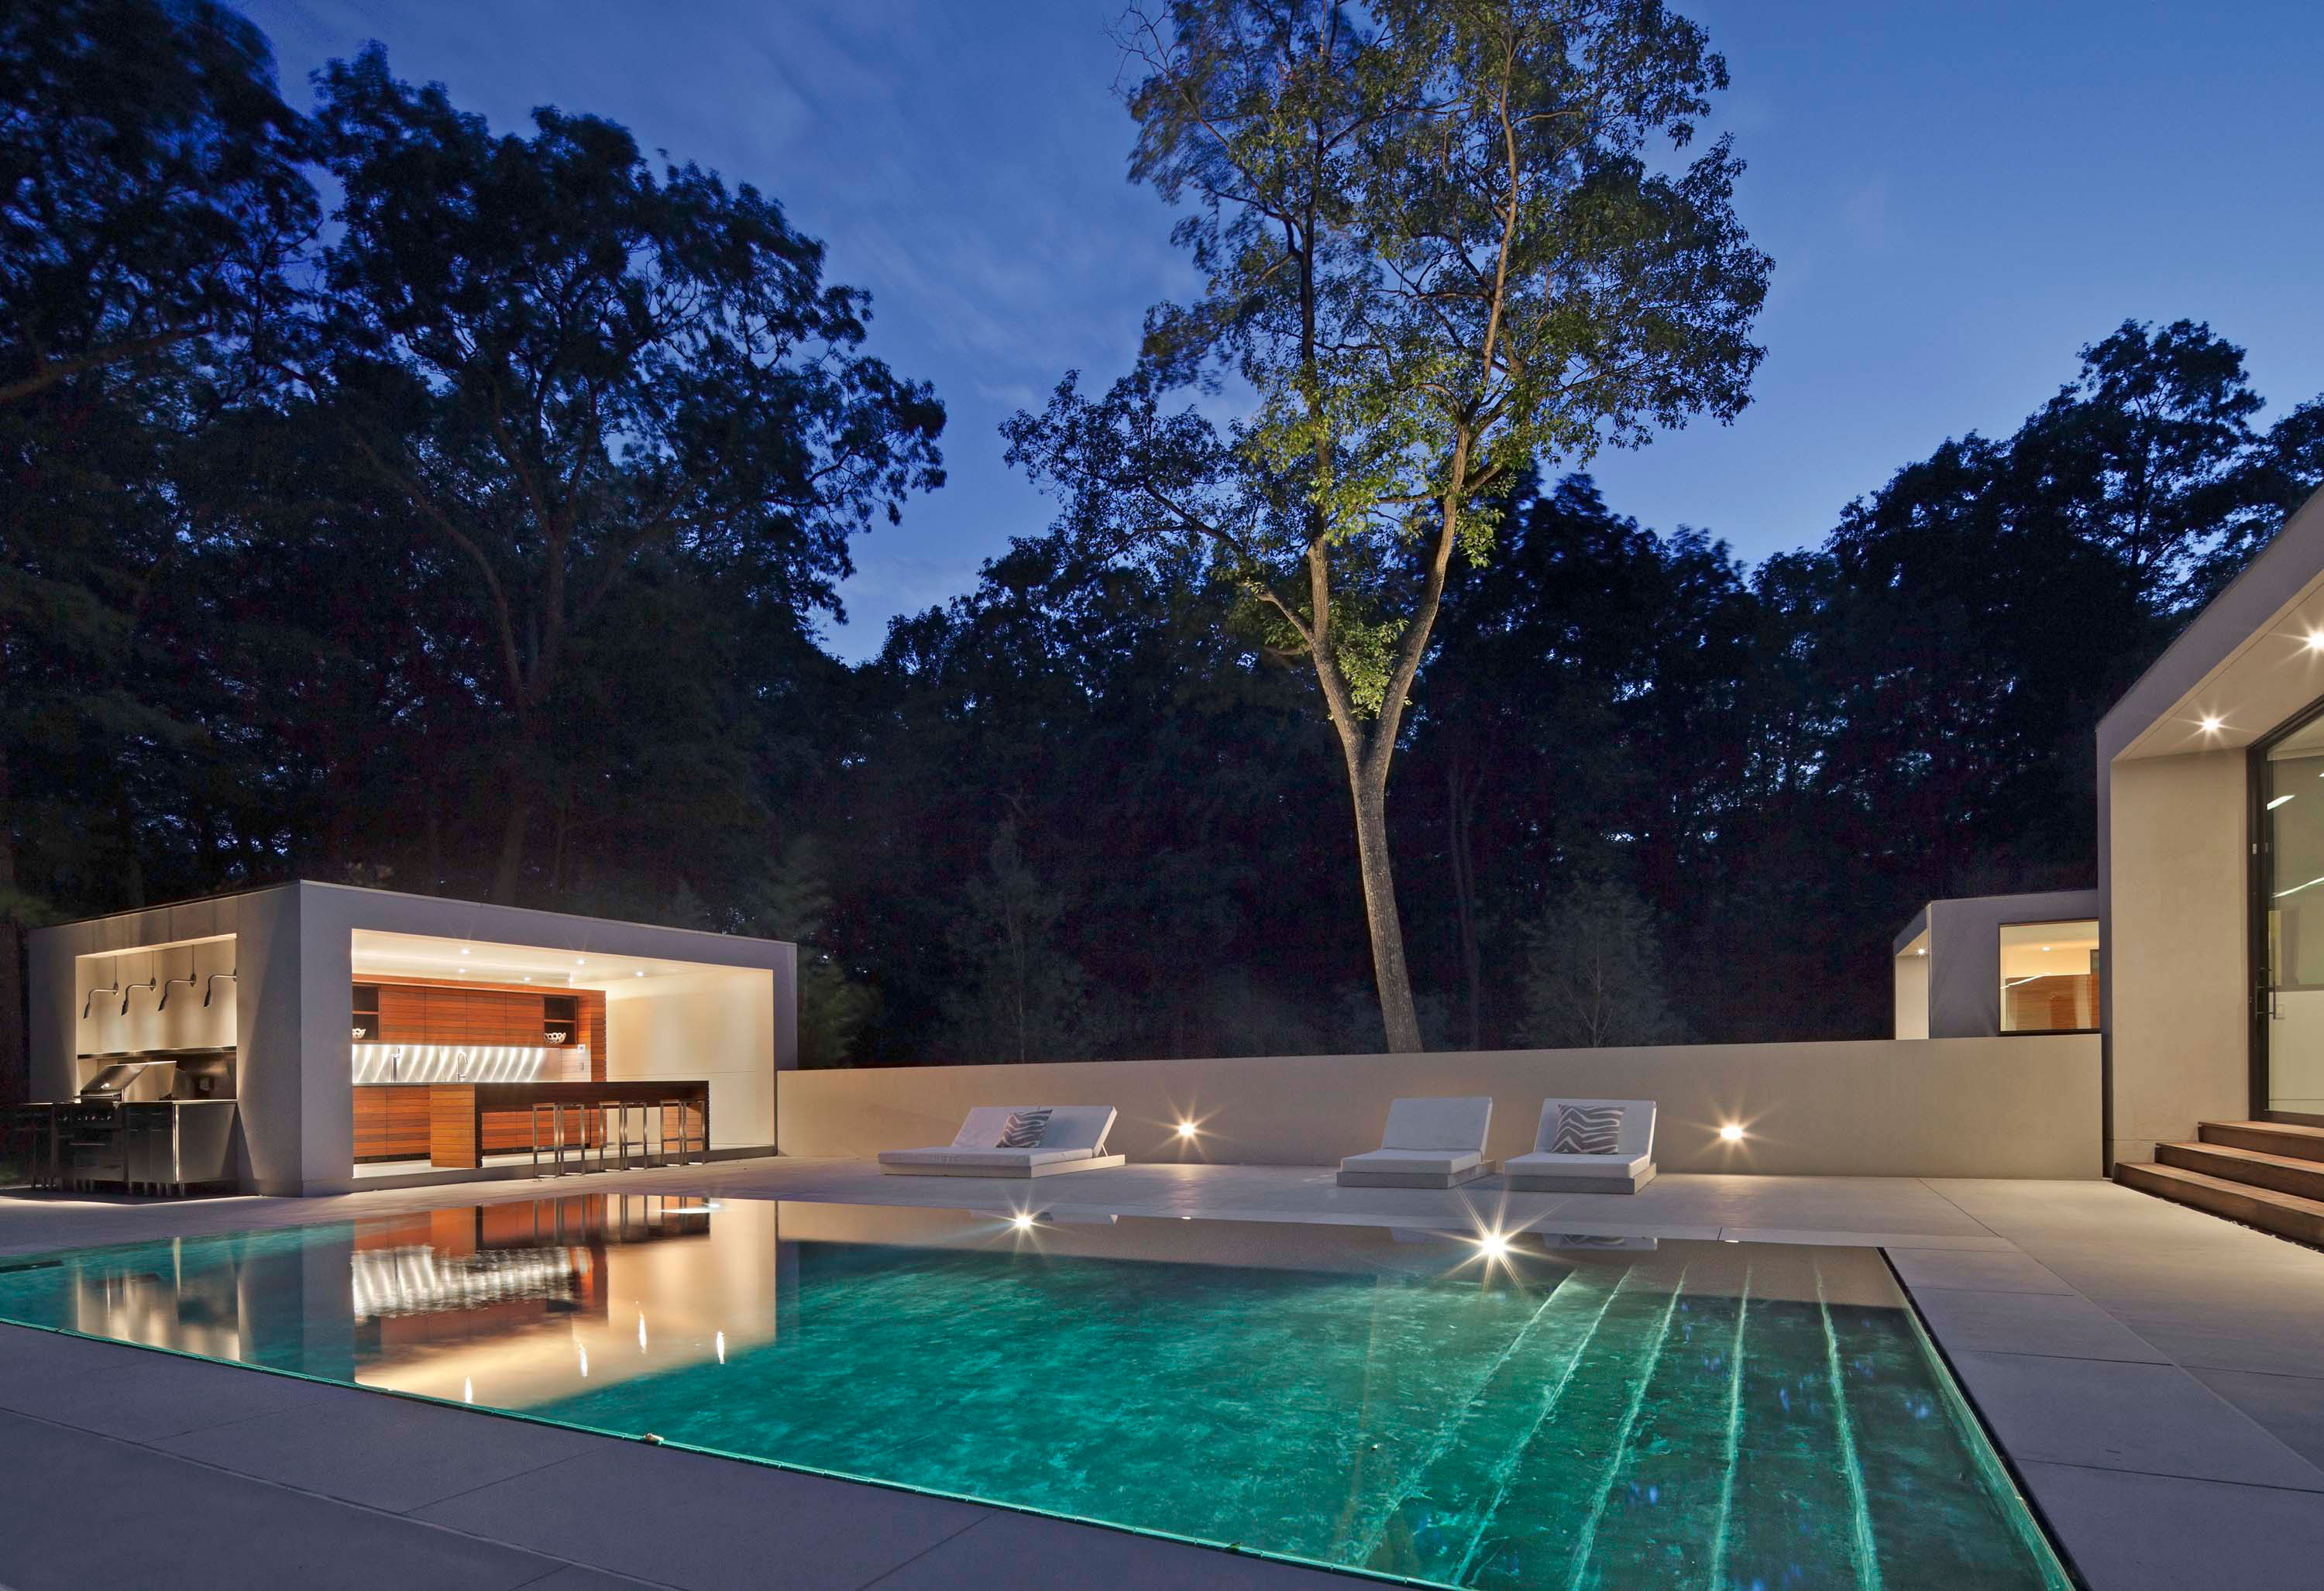 Exterior photo of the New Canaan Residence by Specht Novak Architects. Shot at dusk by Elizabeth Felicella featuring the pool, lounging area, and covered outside dining/bar area surrounded by trees.